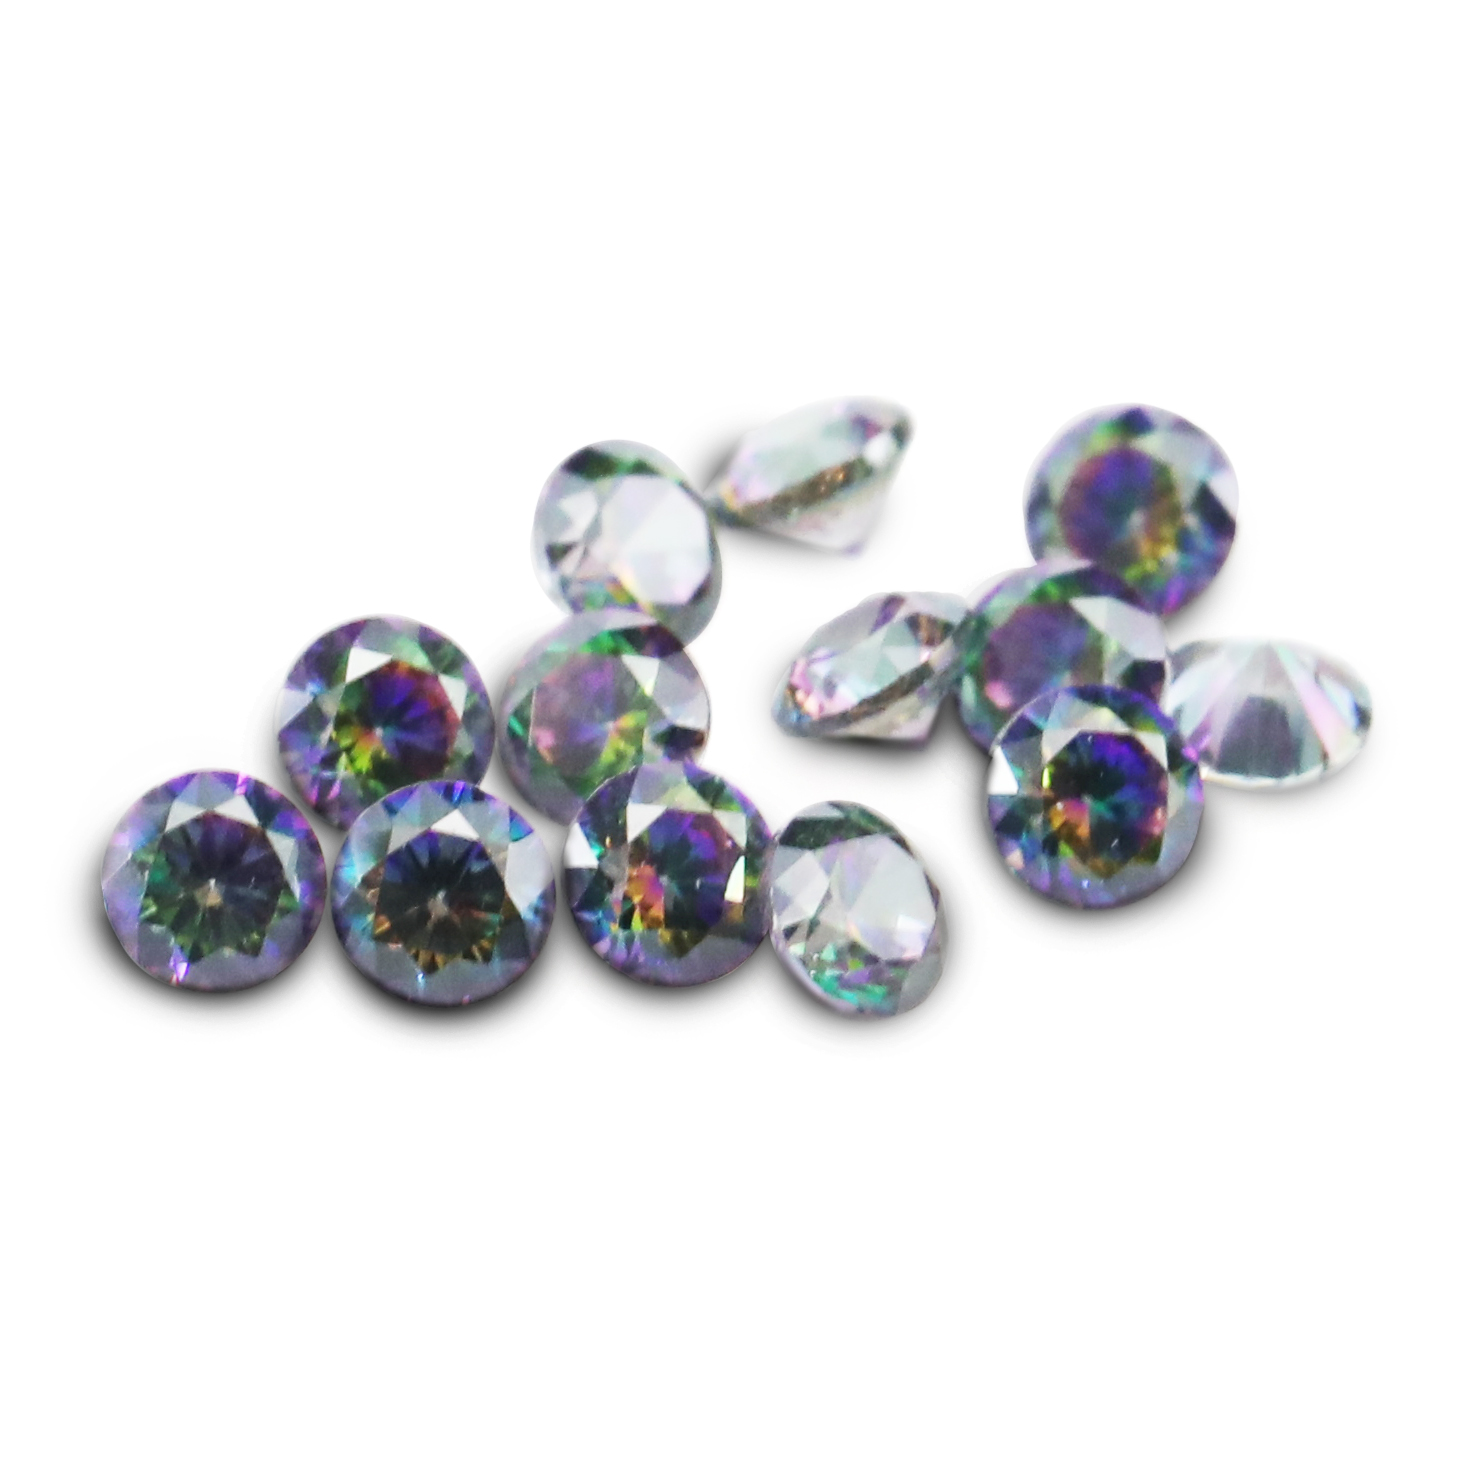 50Pcs 1MM Imitation Birthstone Round Faceted Color Cubic Zirconia CZ Stone DIY Loose Stone Supplies 4110183-1MM - Click Image to Close